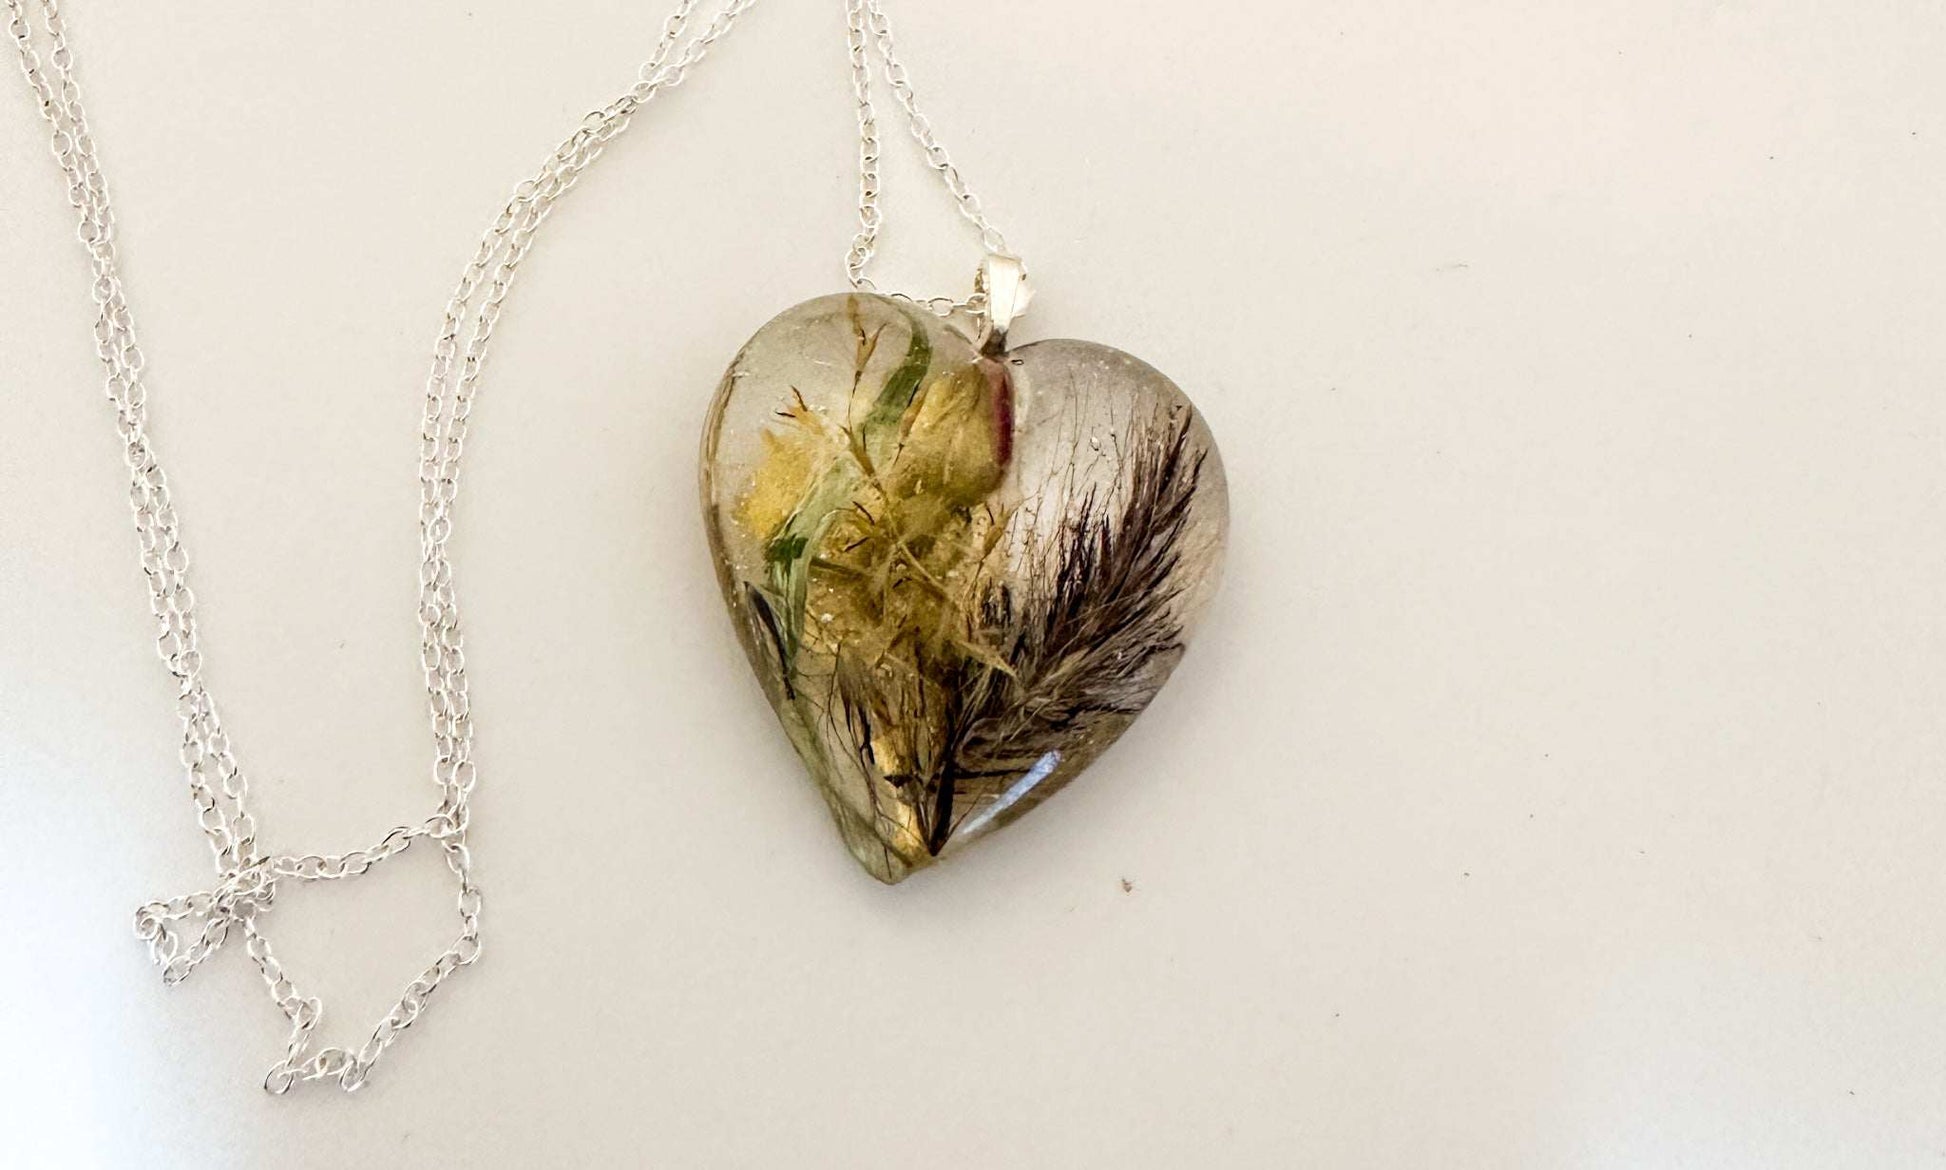 Wild Rose Heart: Handmade Heart Pendant with Wild Rose and Botanicals